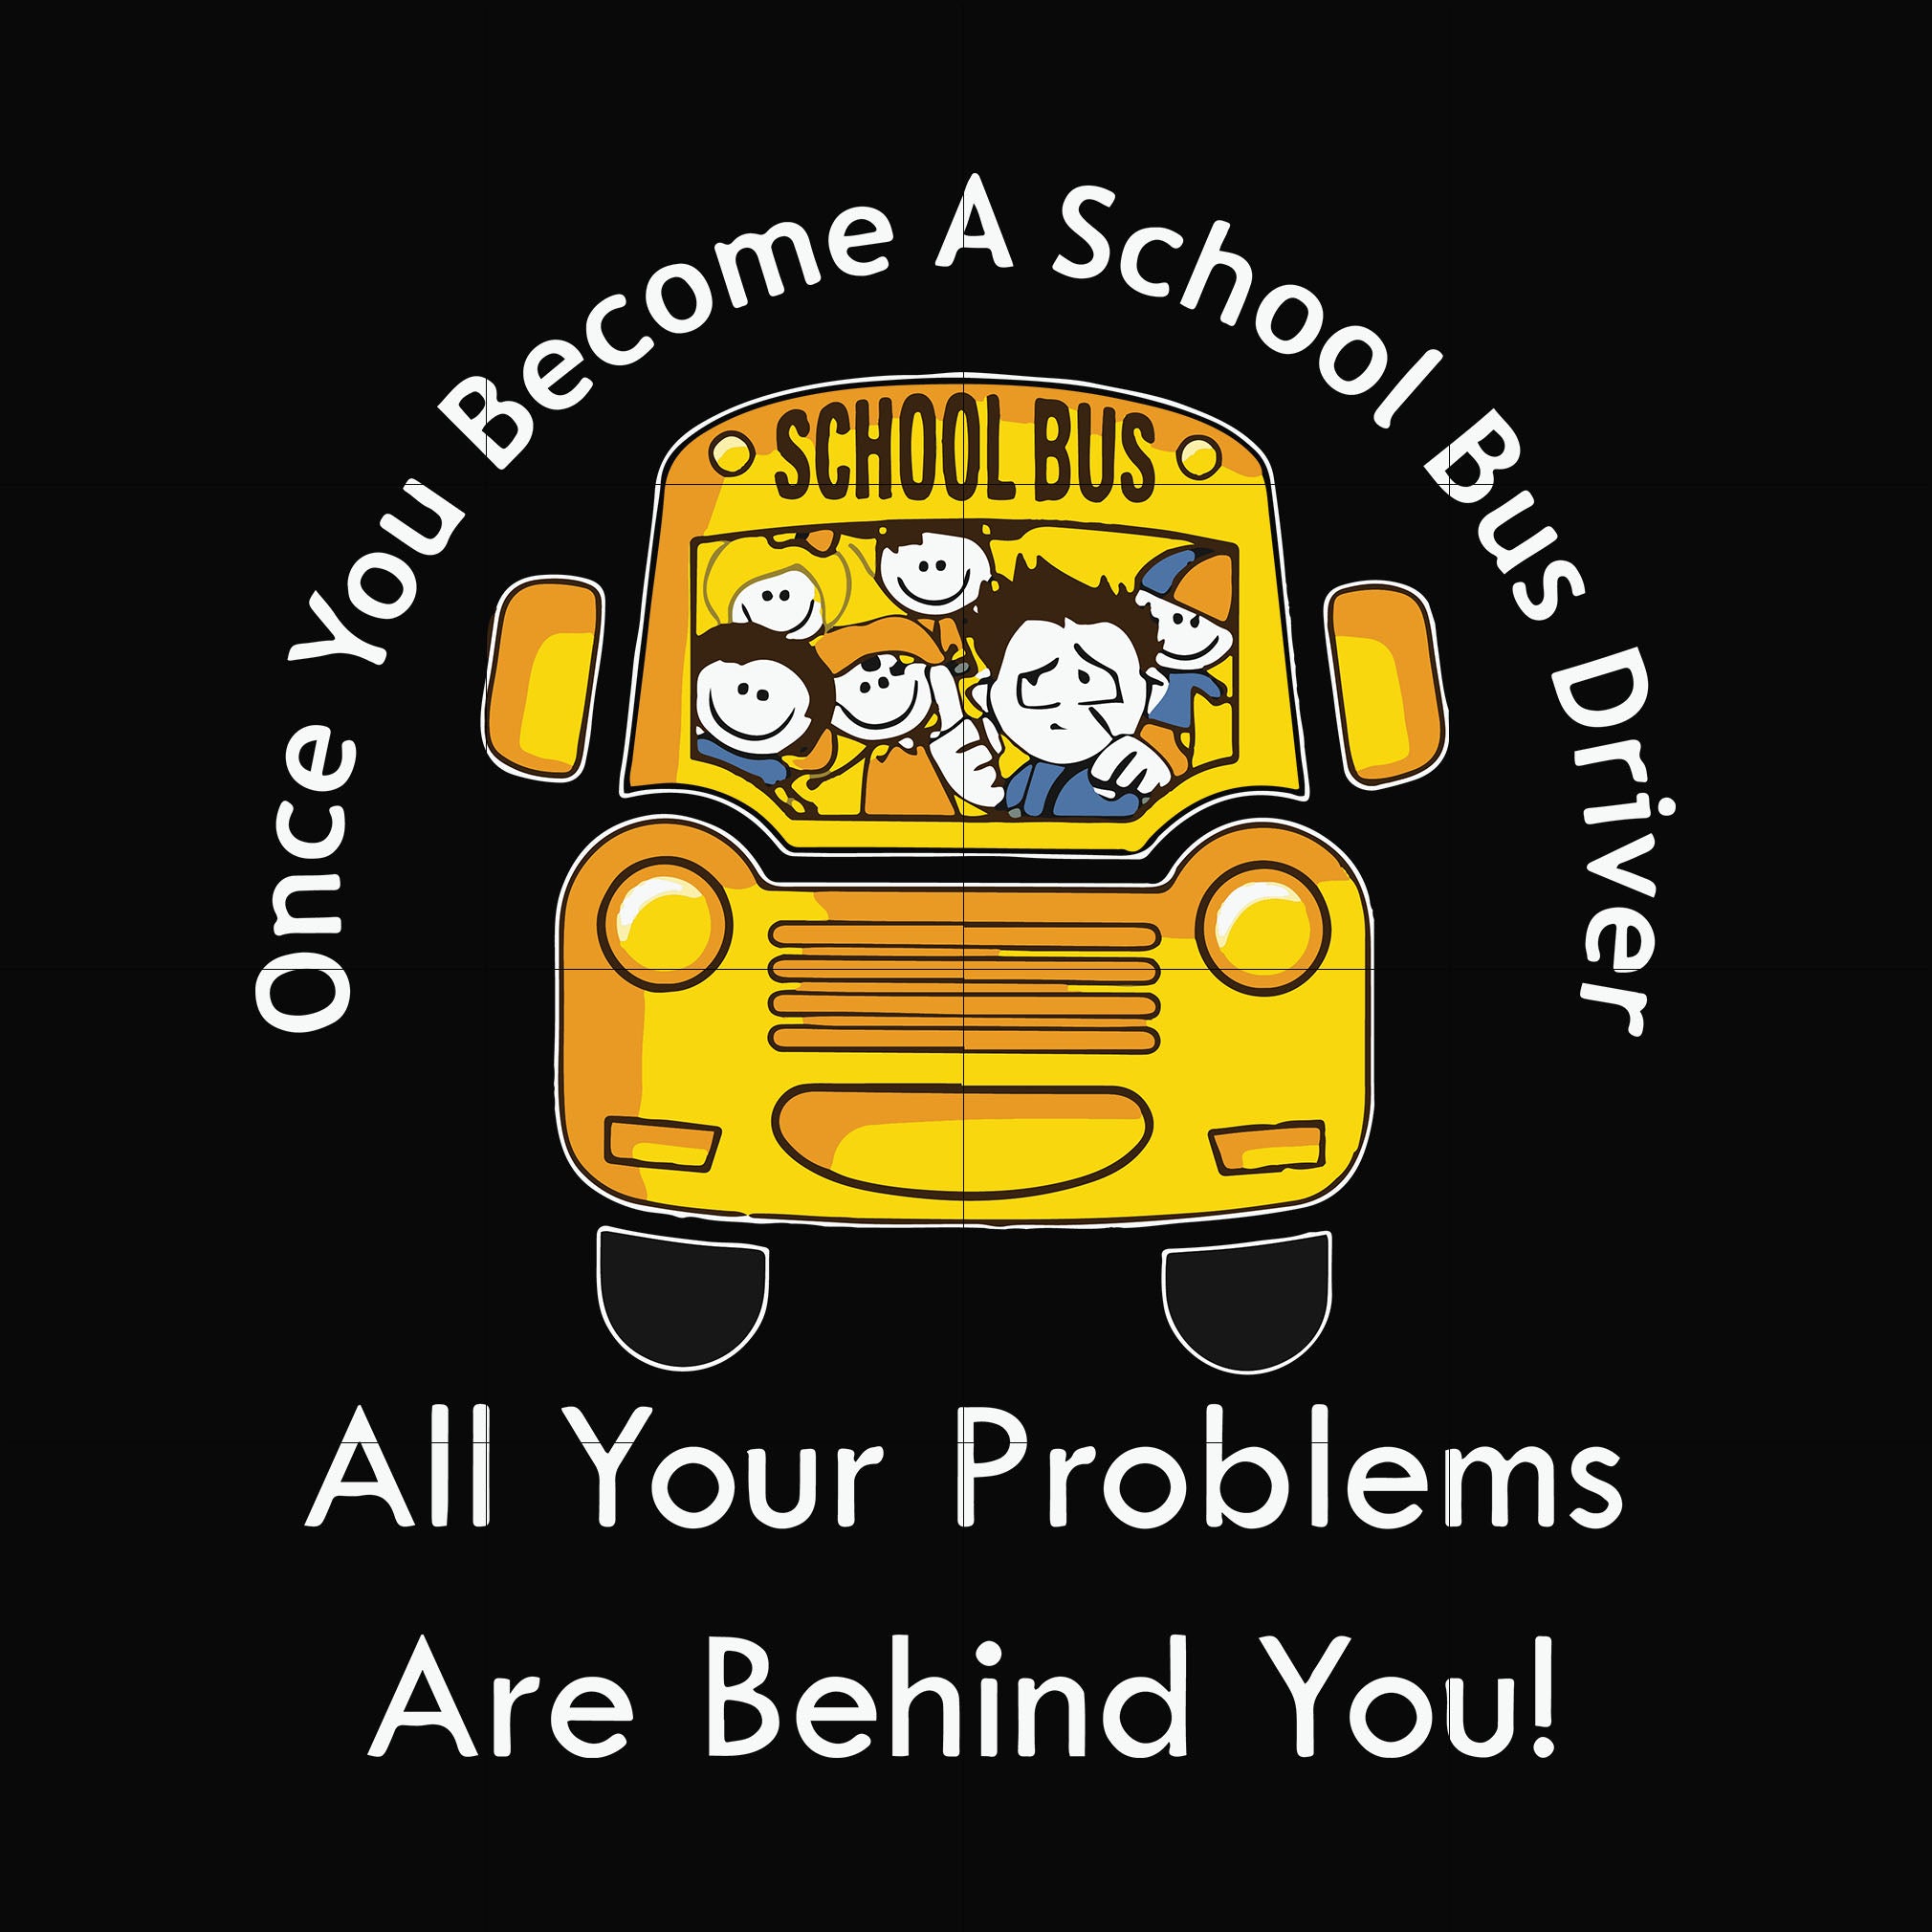 Once you become a school bus driver all your problems are behind you! svg, png, dxf, eps file FN000871